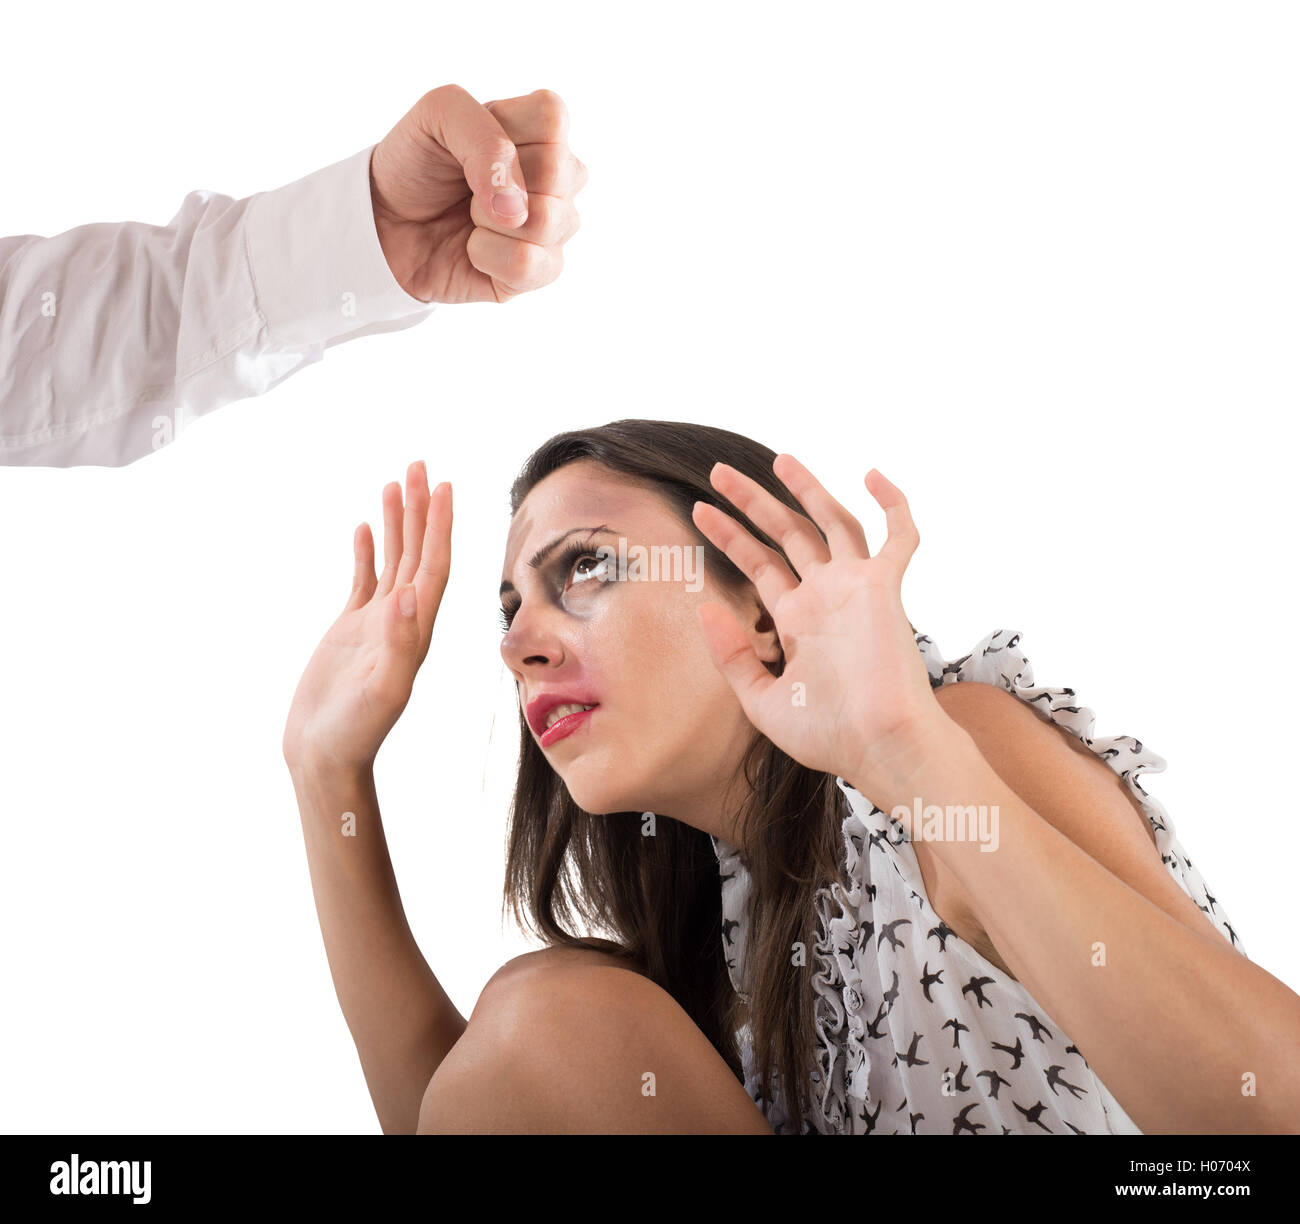 Violence against women Stock Photo